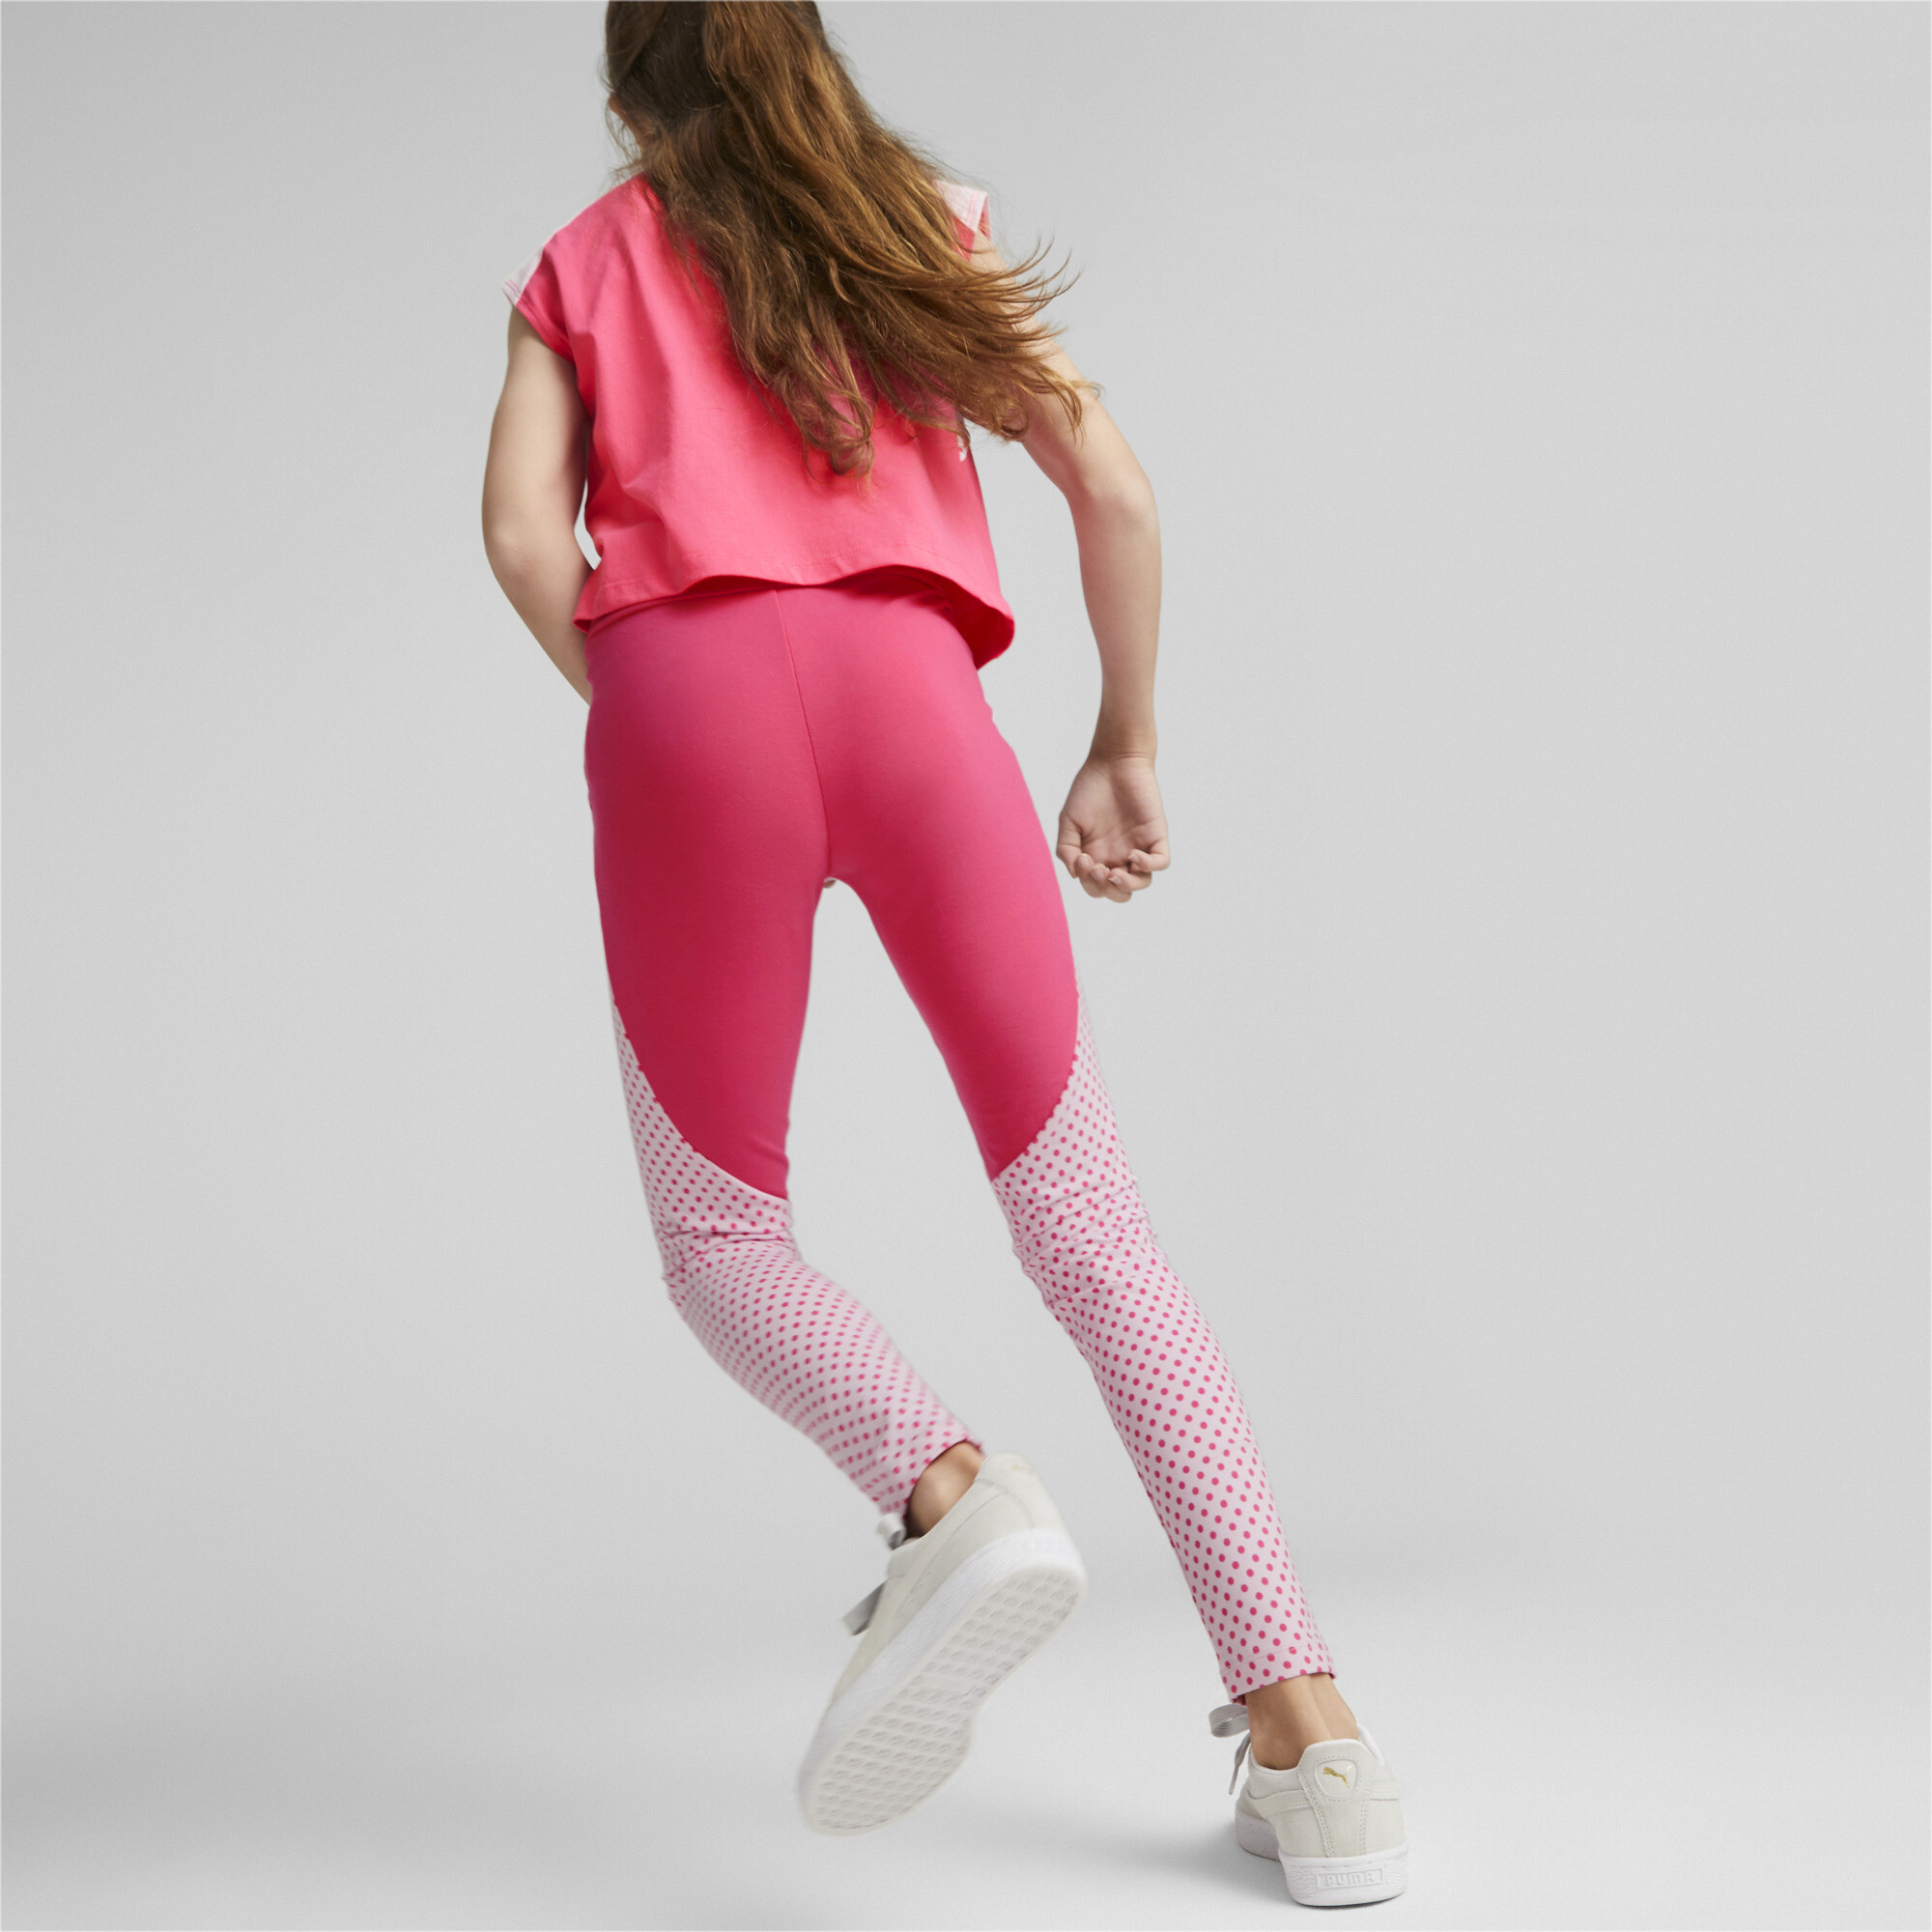 PUMA X MIRACULOUS Leggings In Pink, Size 7-8 Youth